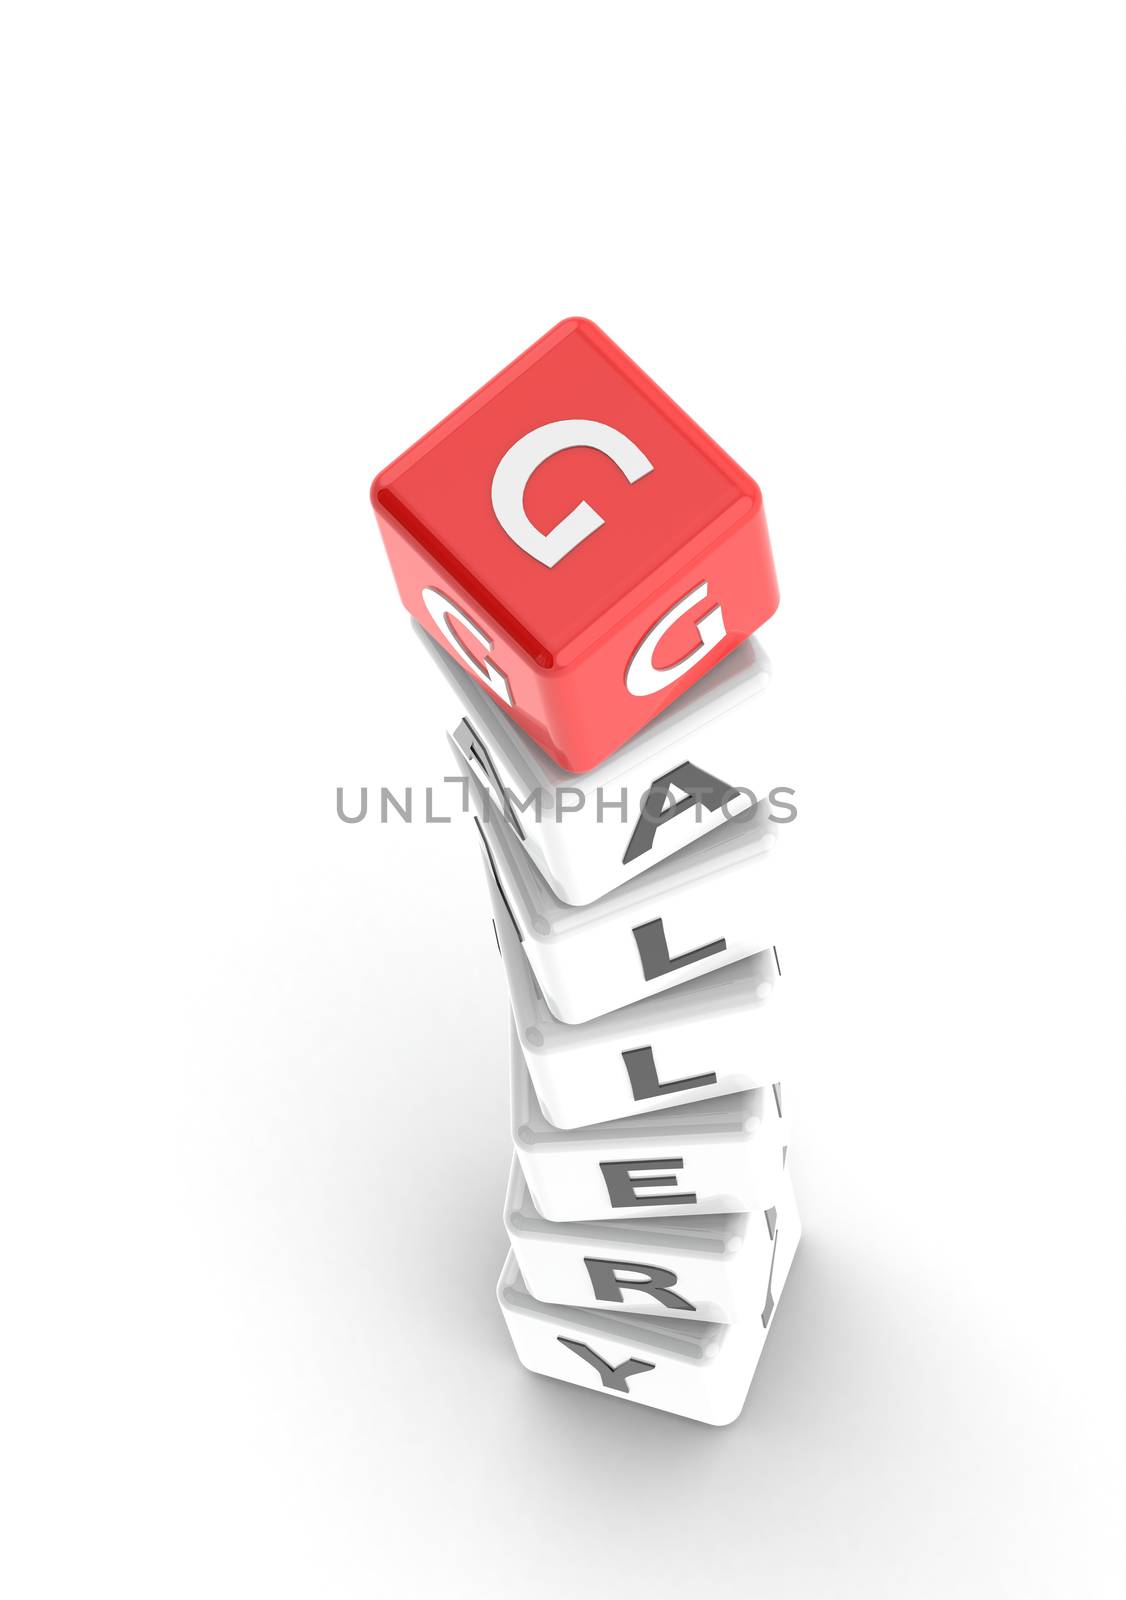 Gallery puzzle word image with hi-res rendered artwork that could be used for any graphic design.